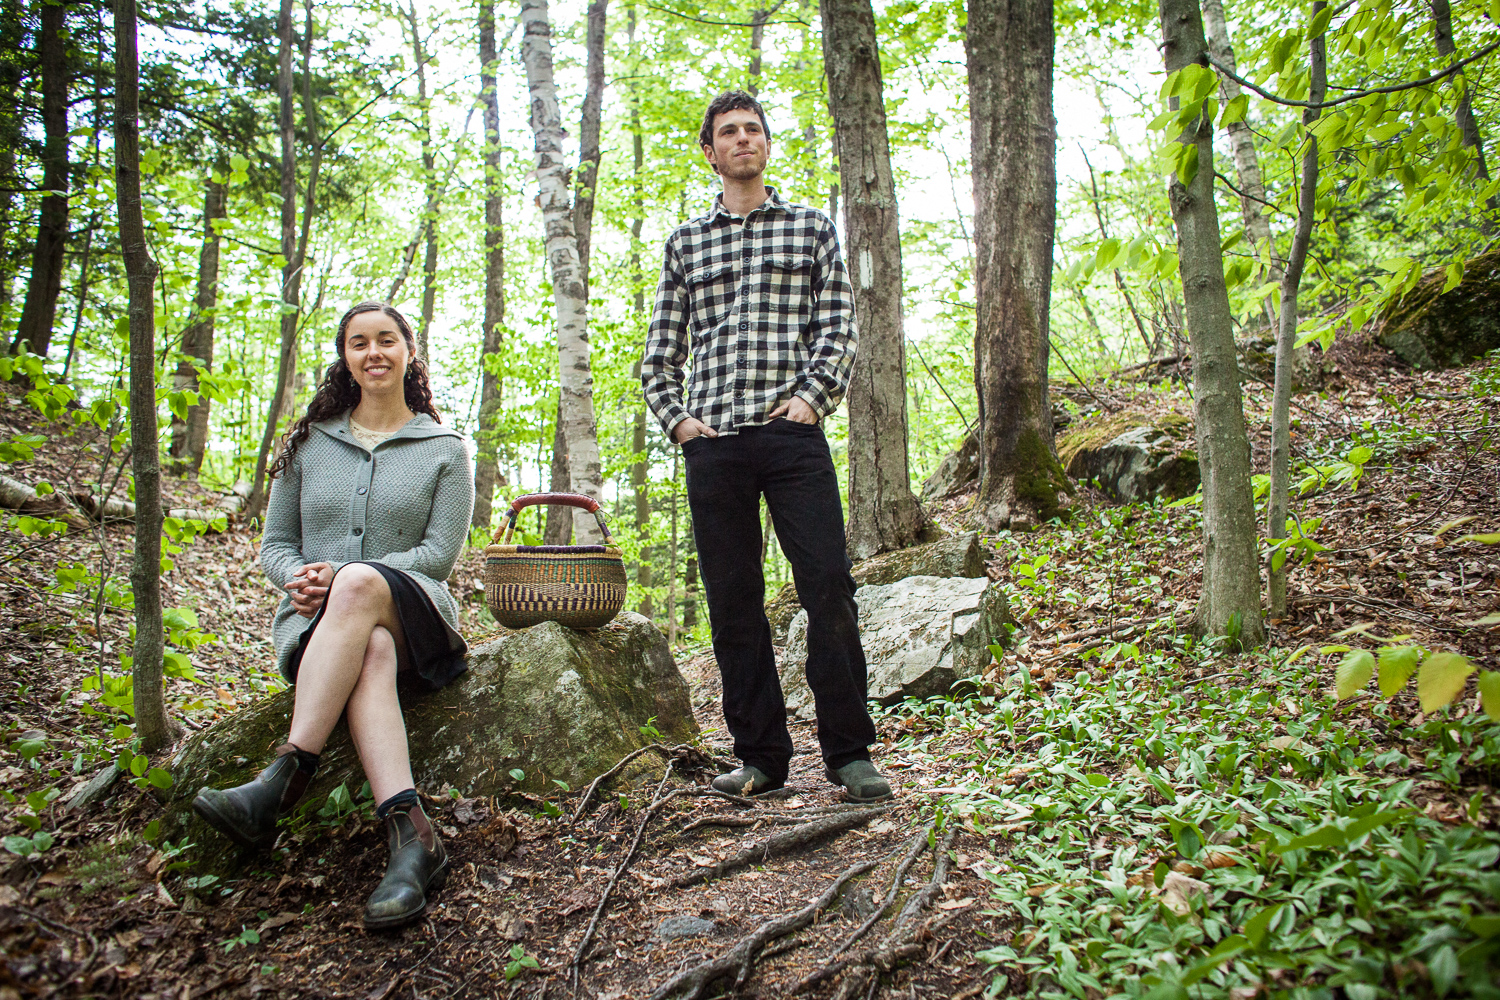 Jenna Antonino DiMare and Ari Rockland-Miller of The Mushroom Forager pose for a portrait during a foraging session in the woods of Vermont.